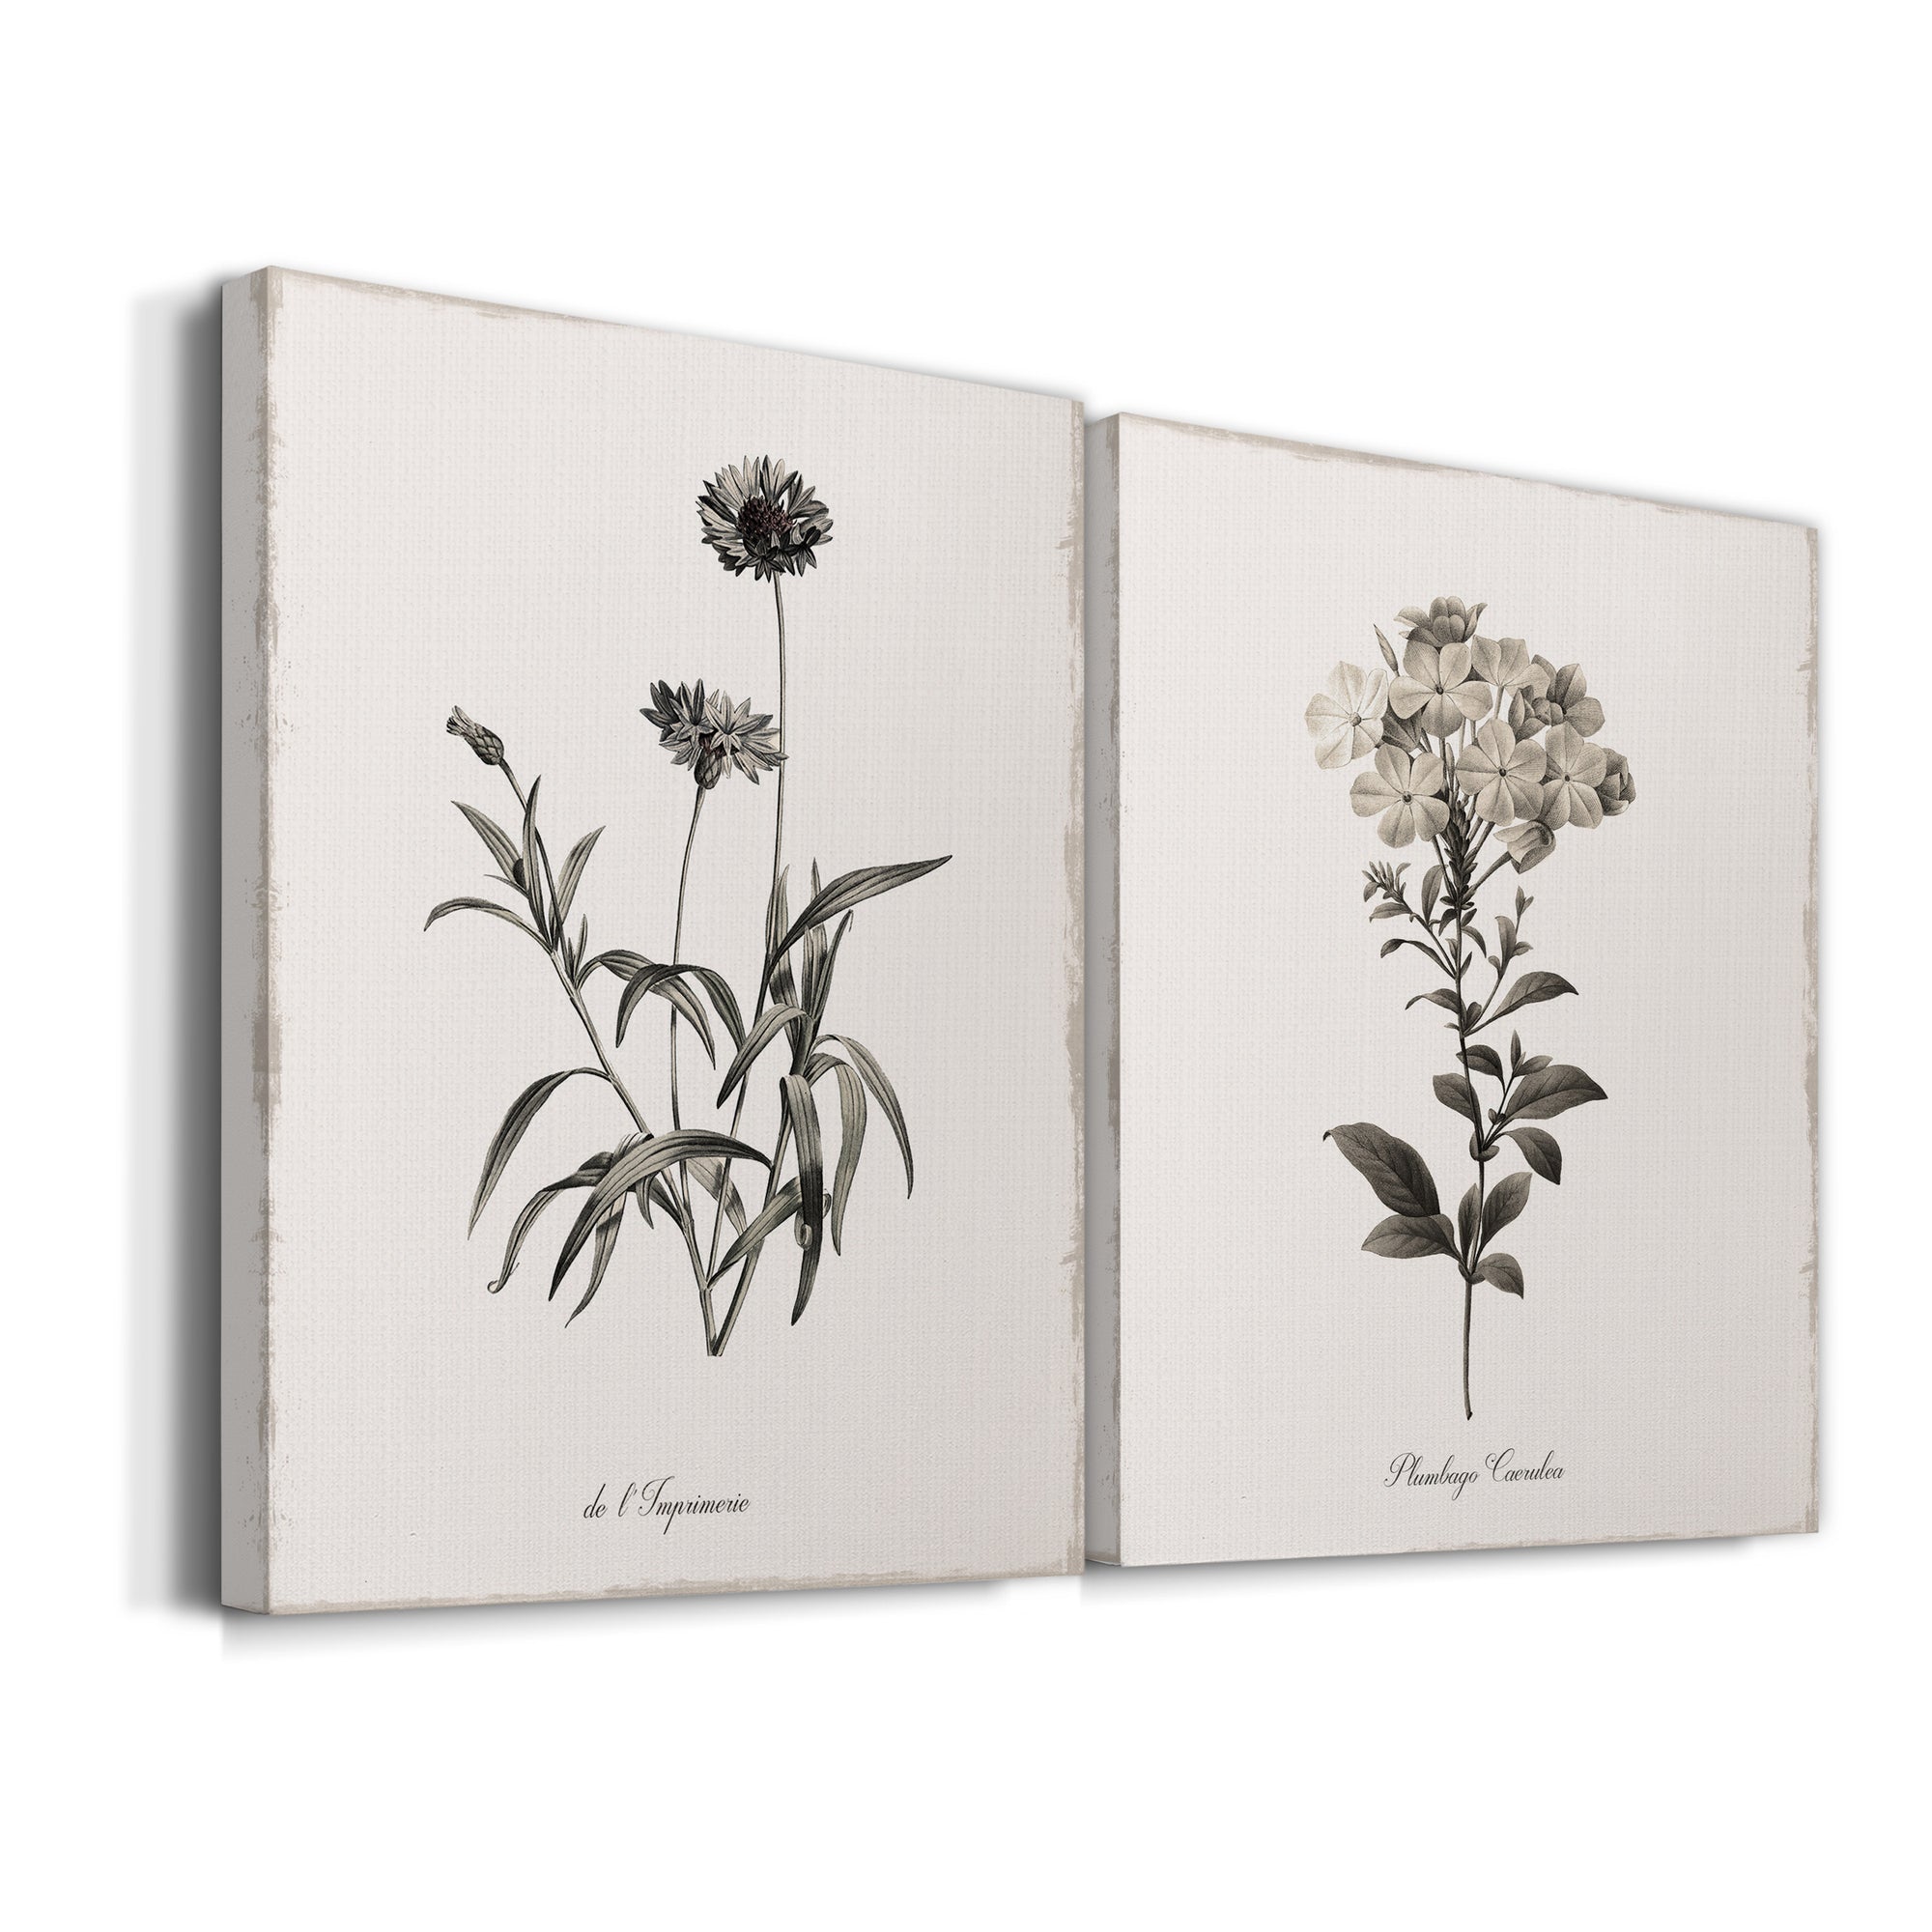 Sketchbook Imperial Premium Gallery Wrapped Canvas - Ready to Hang - Set of 2 - 8 x 12 Each